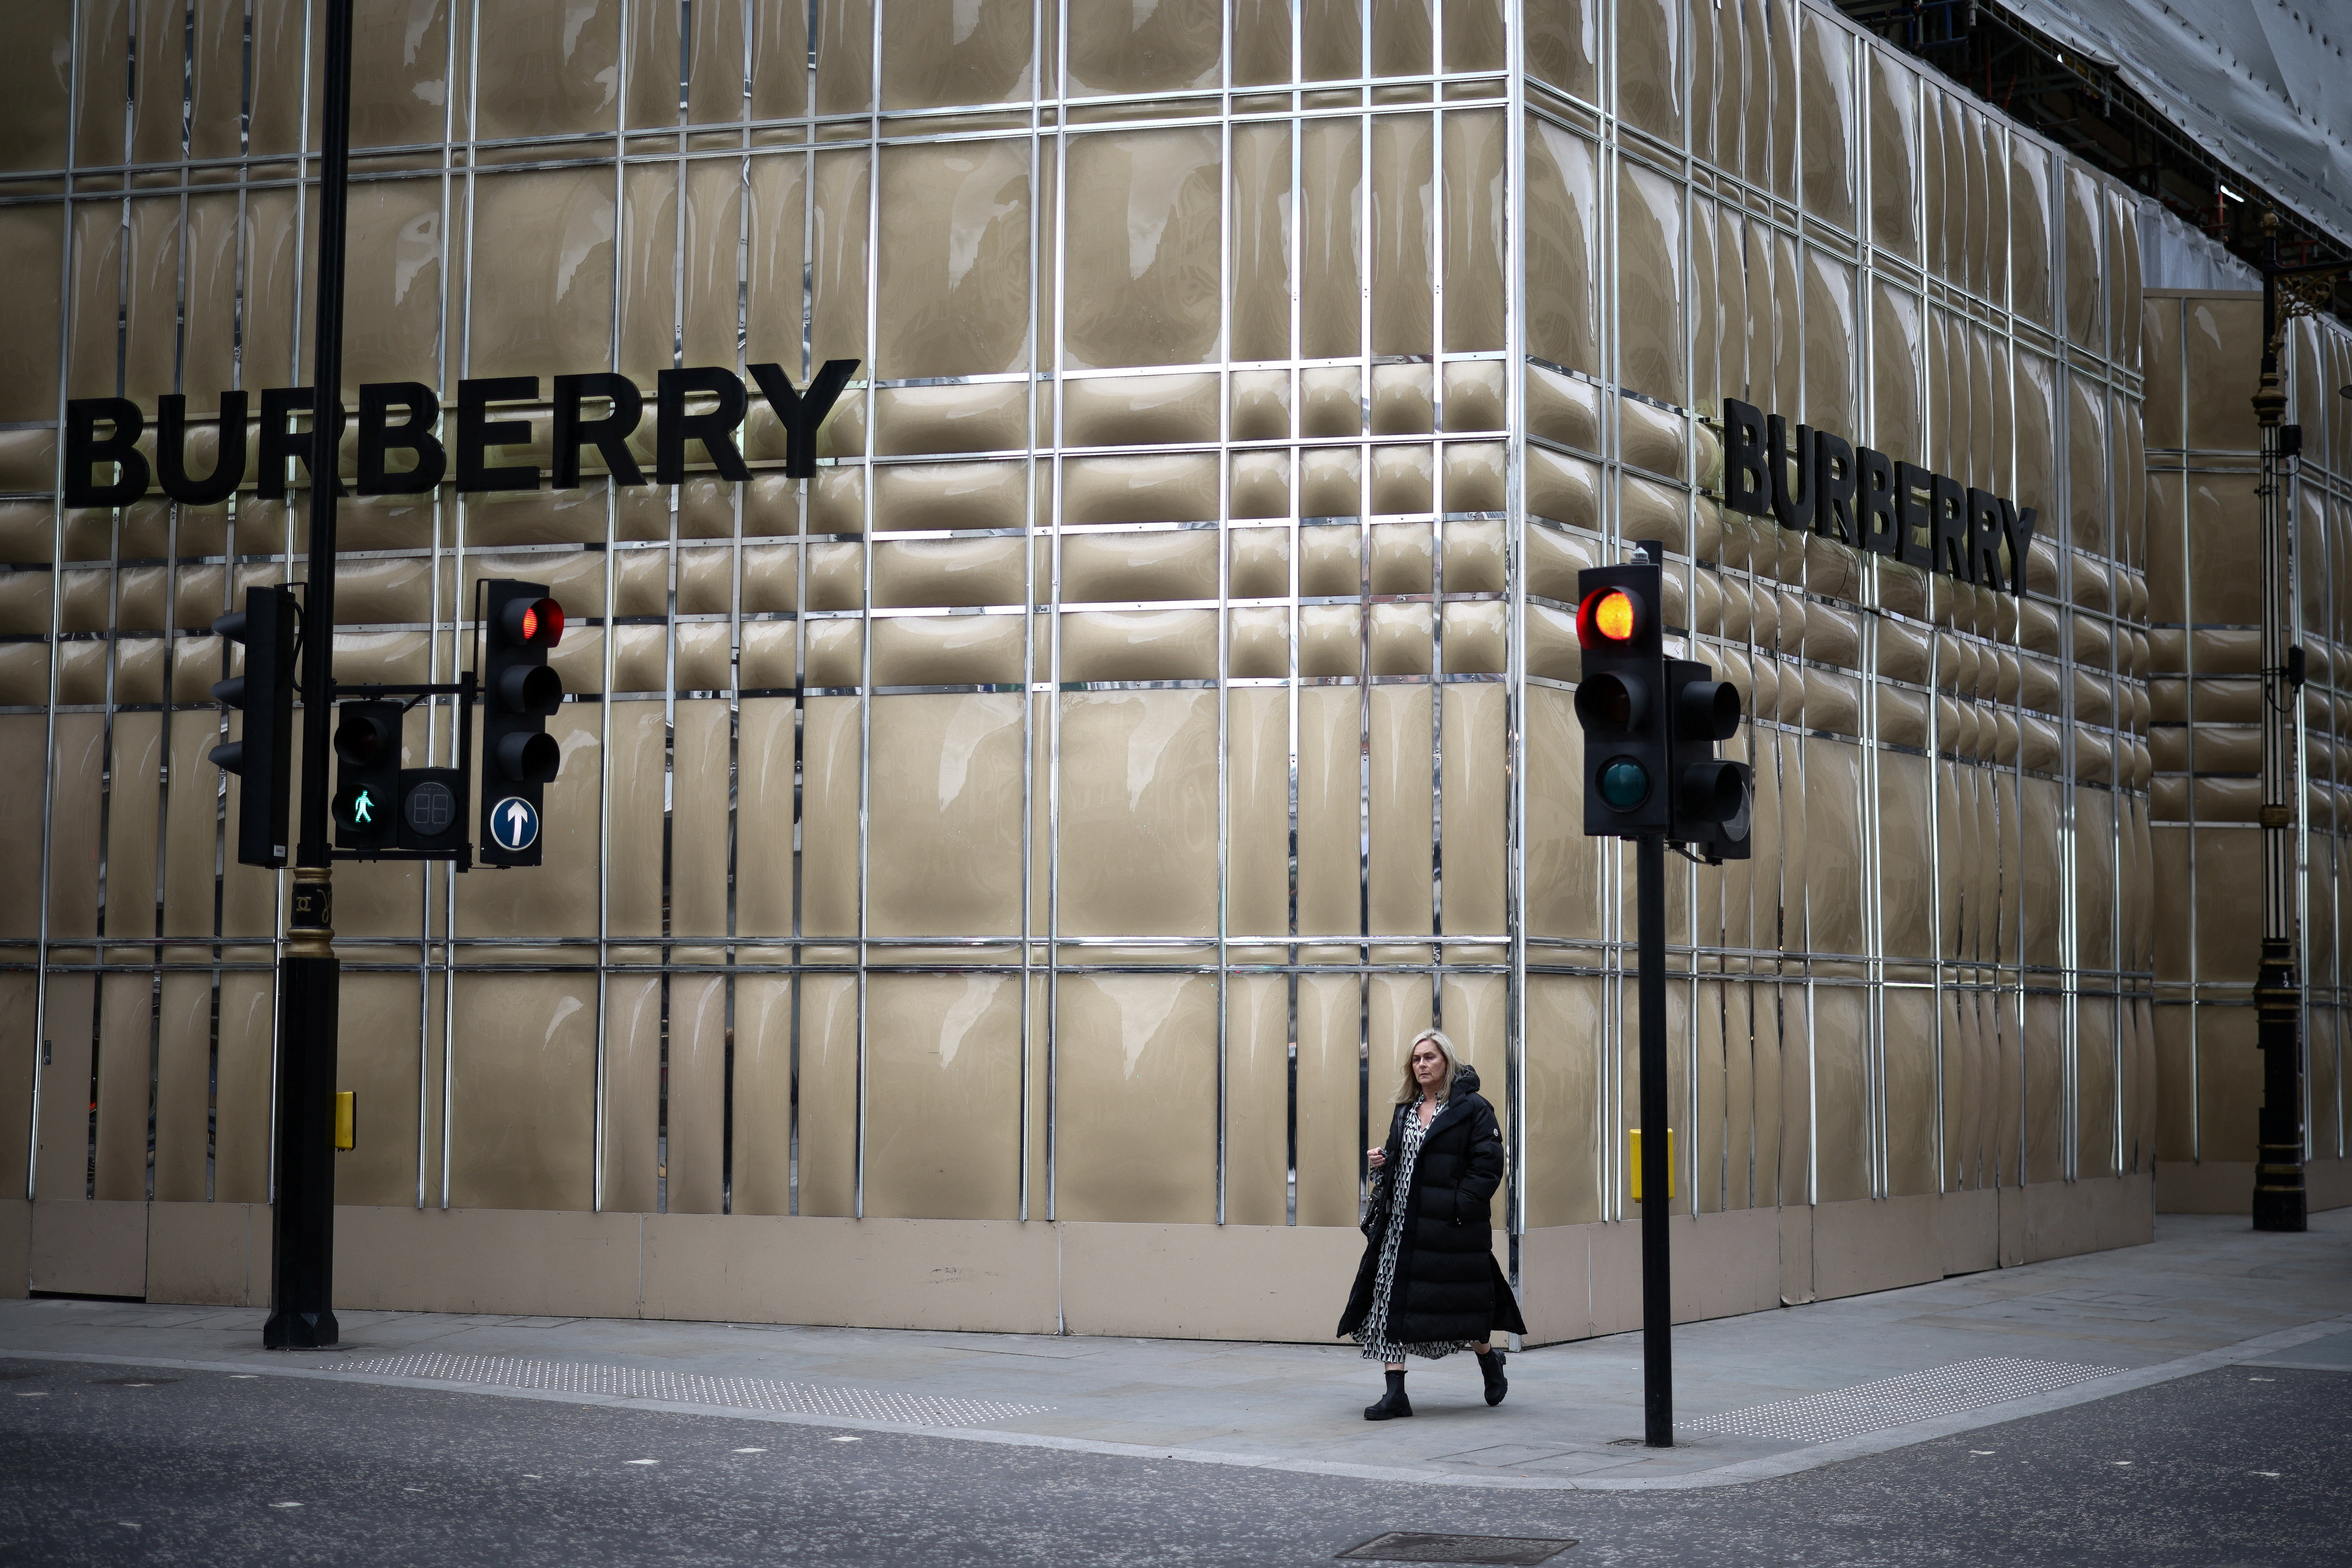 A person walks past a Burberry store undergoing refurbishment on New Bond Street in London